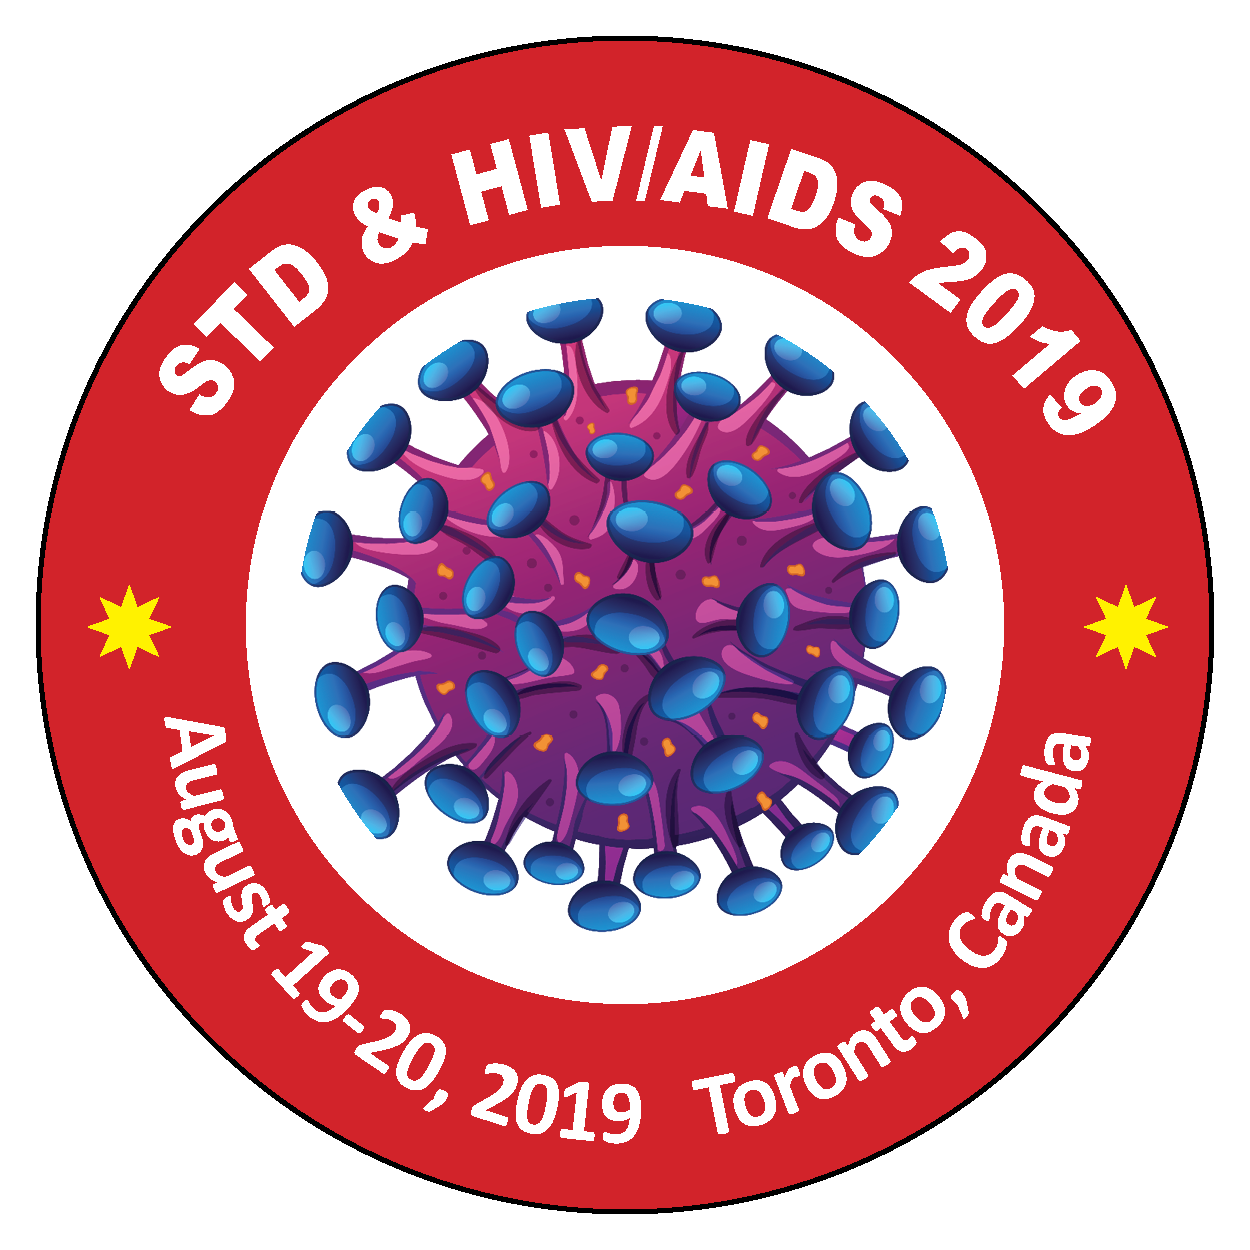 3rd International Conference on Sexually Transmitted Diseases, Infections and AIDS